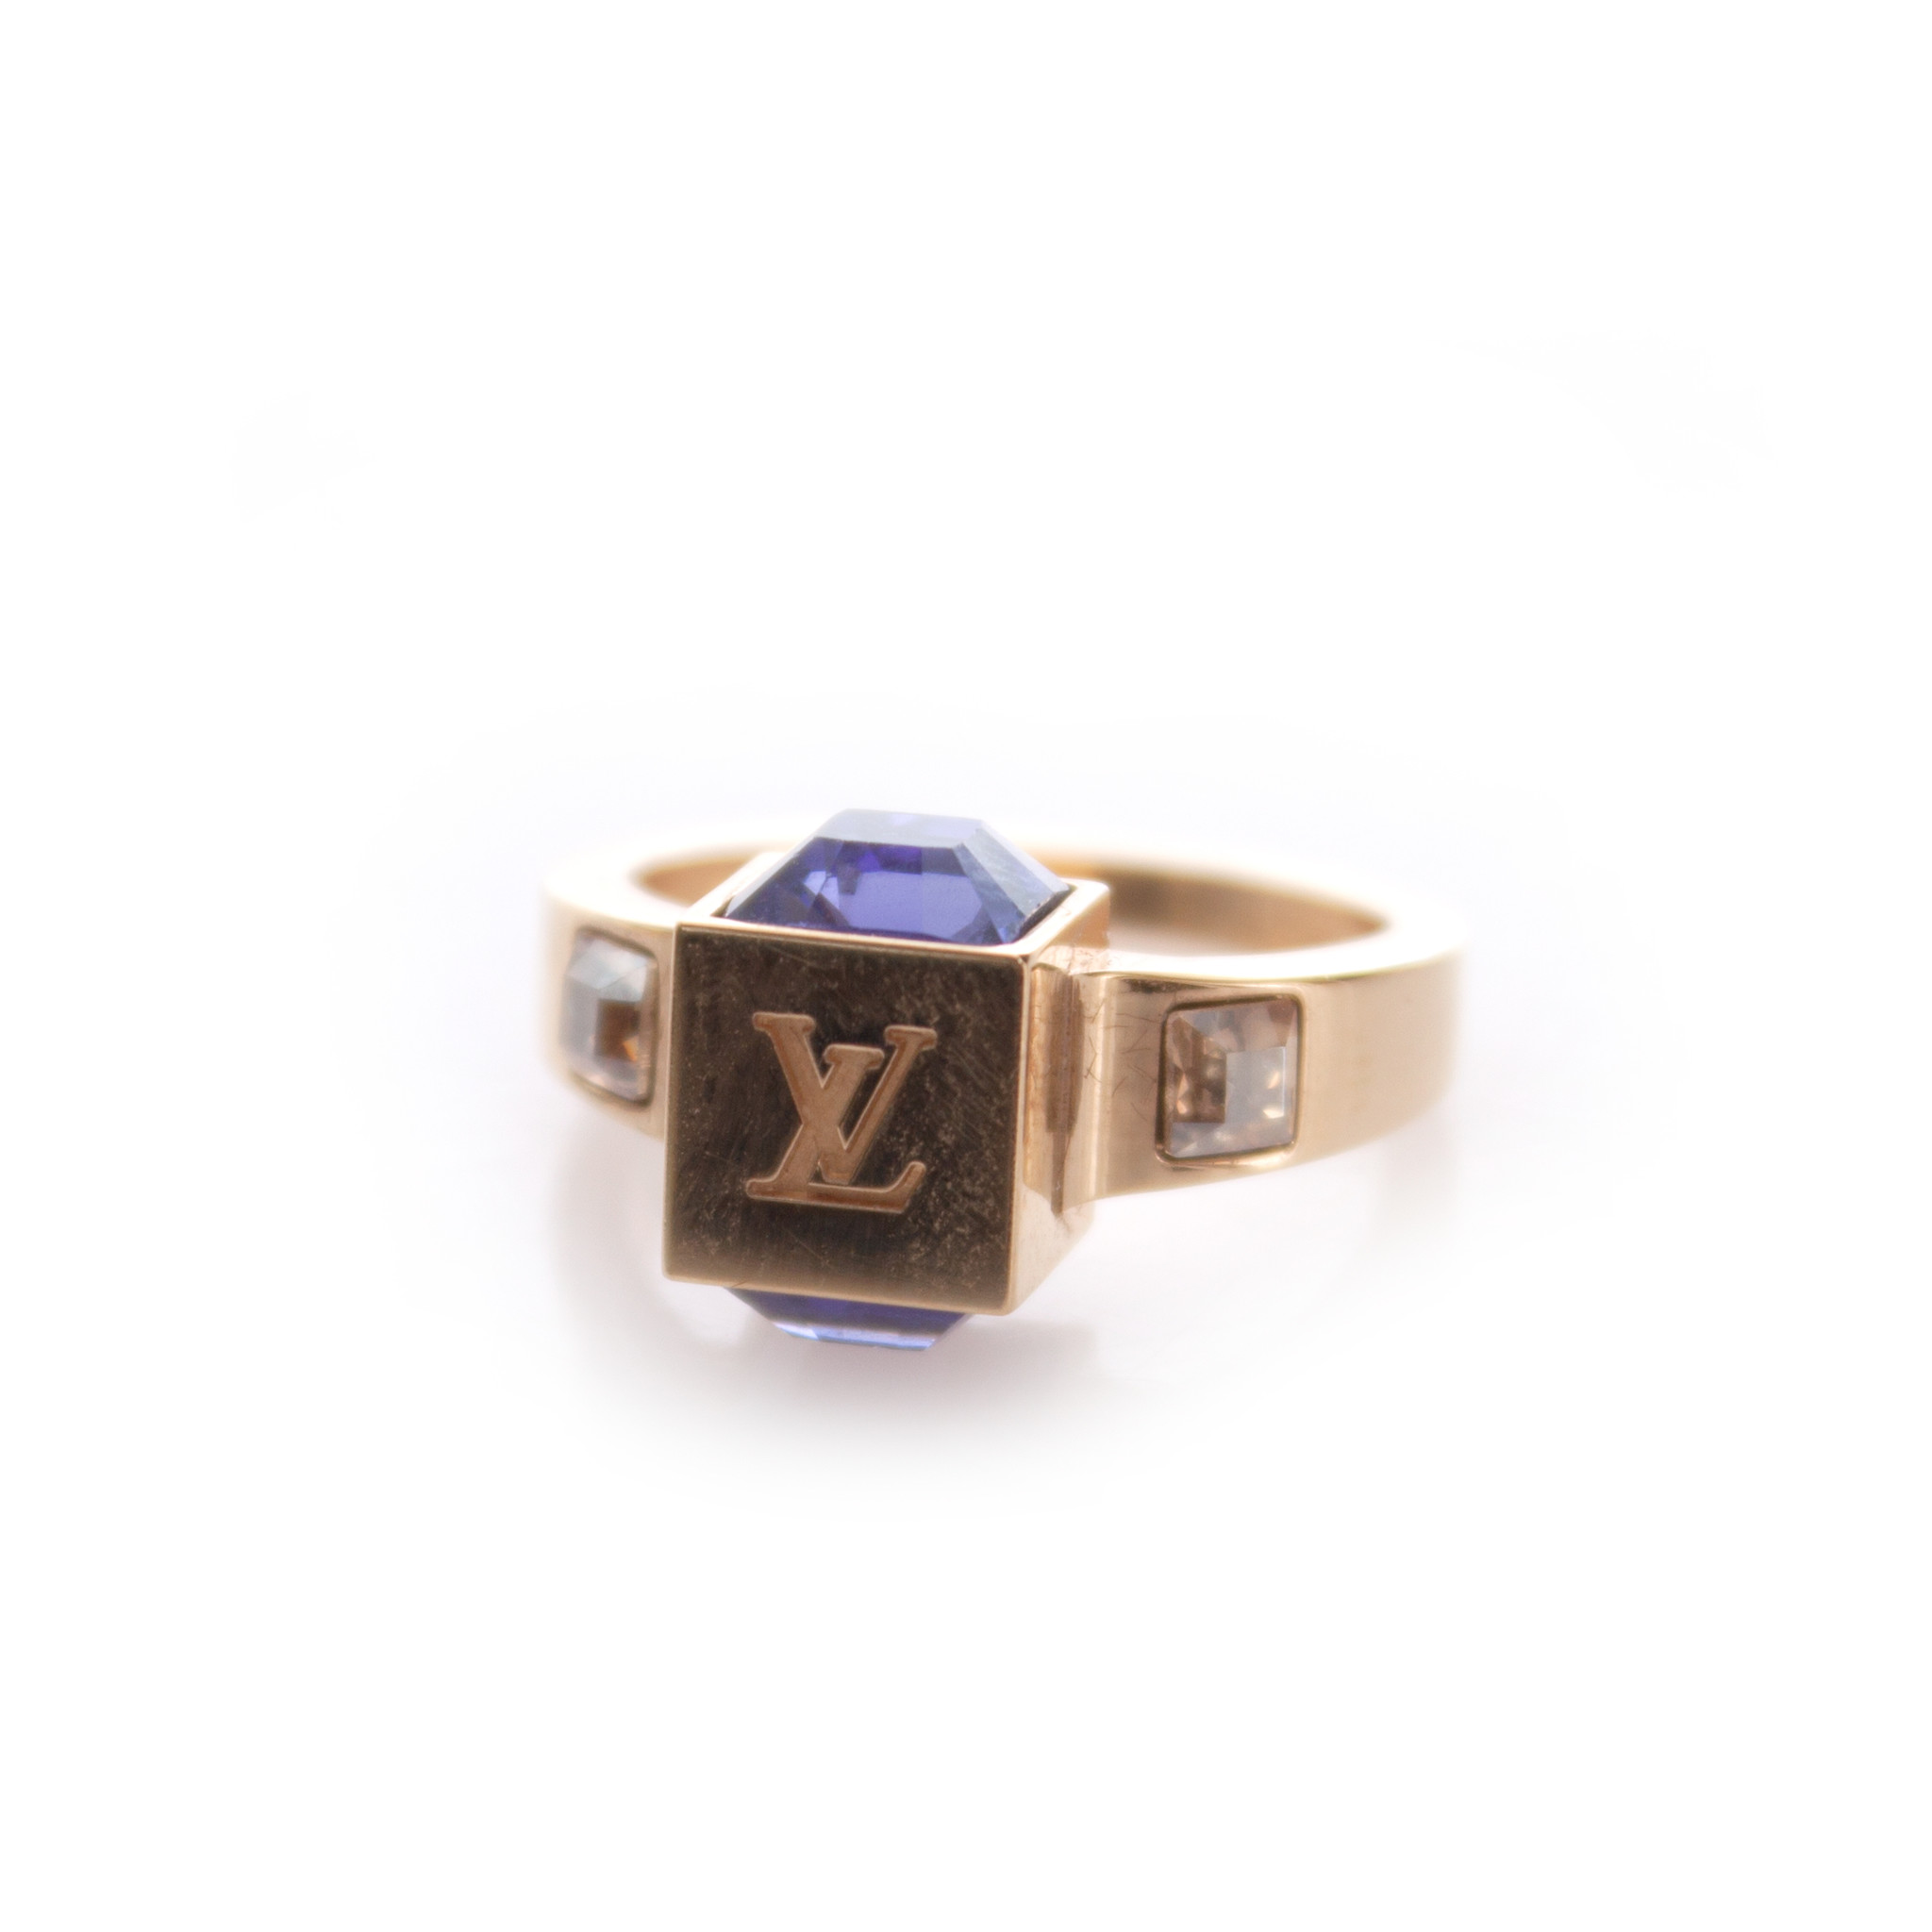 Louis Vuitton Gamble Crystal Gold Tone Ring with Purple & Cognac Crystals  Auction (0074-2547880)